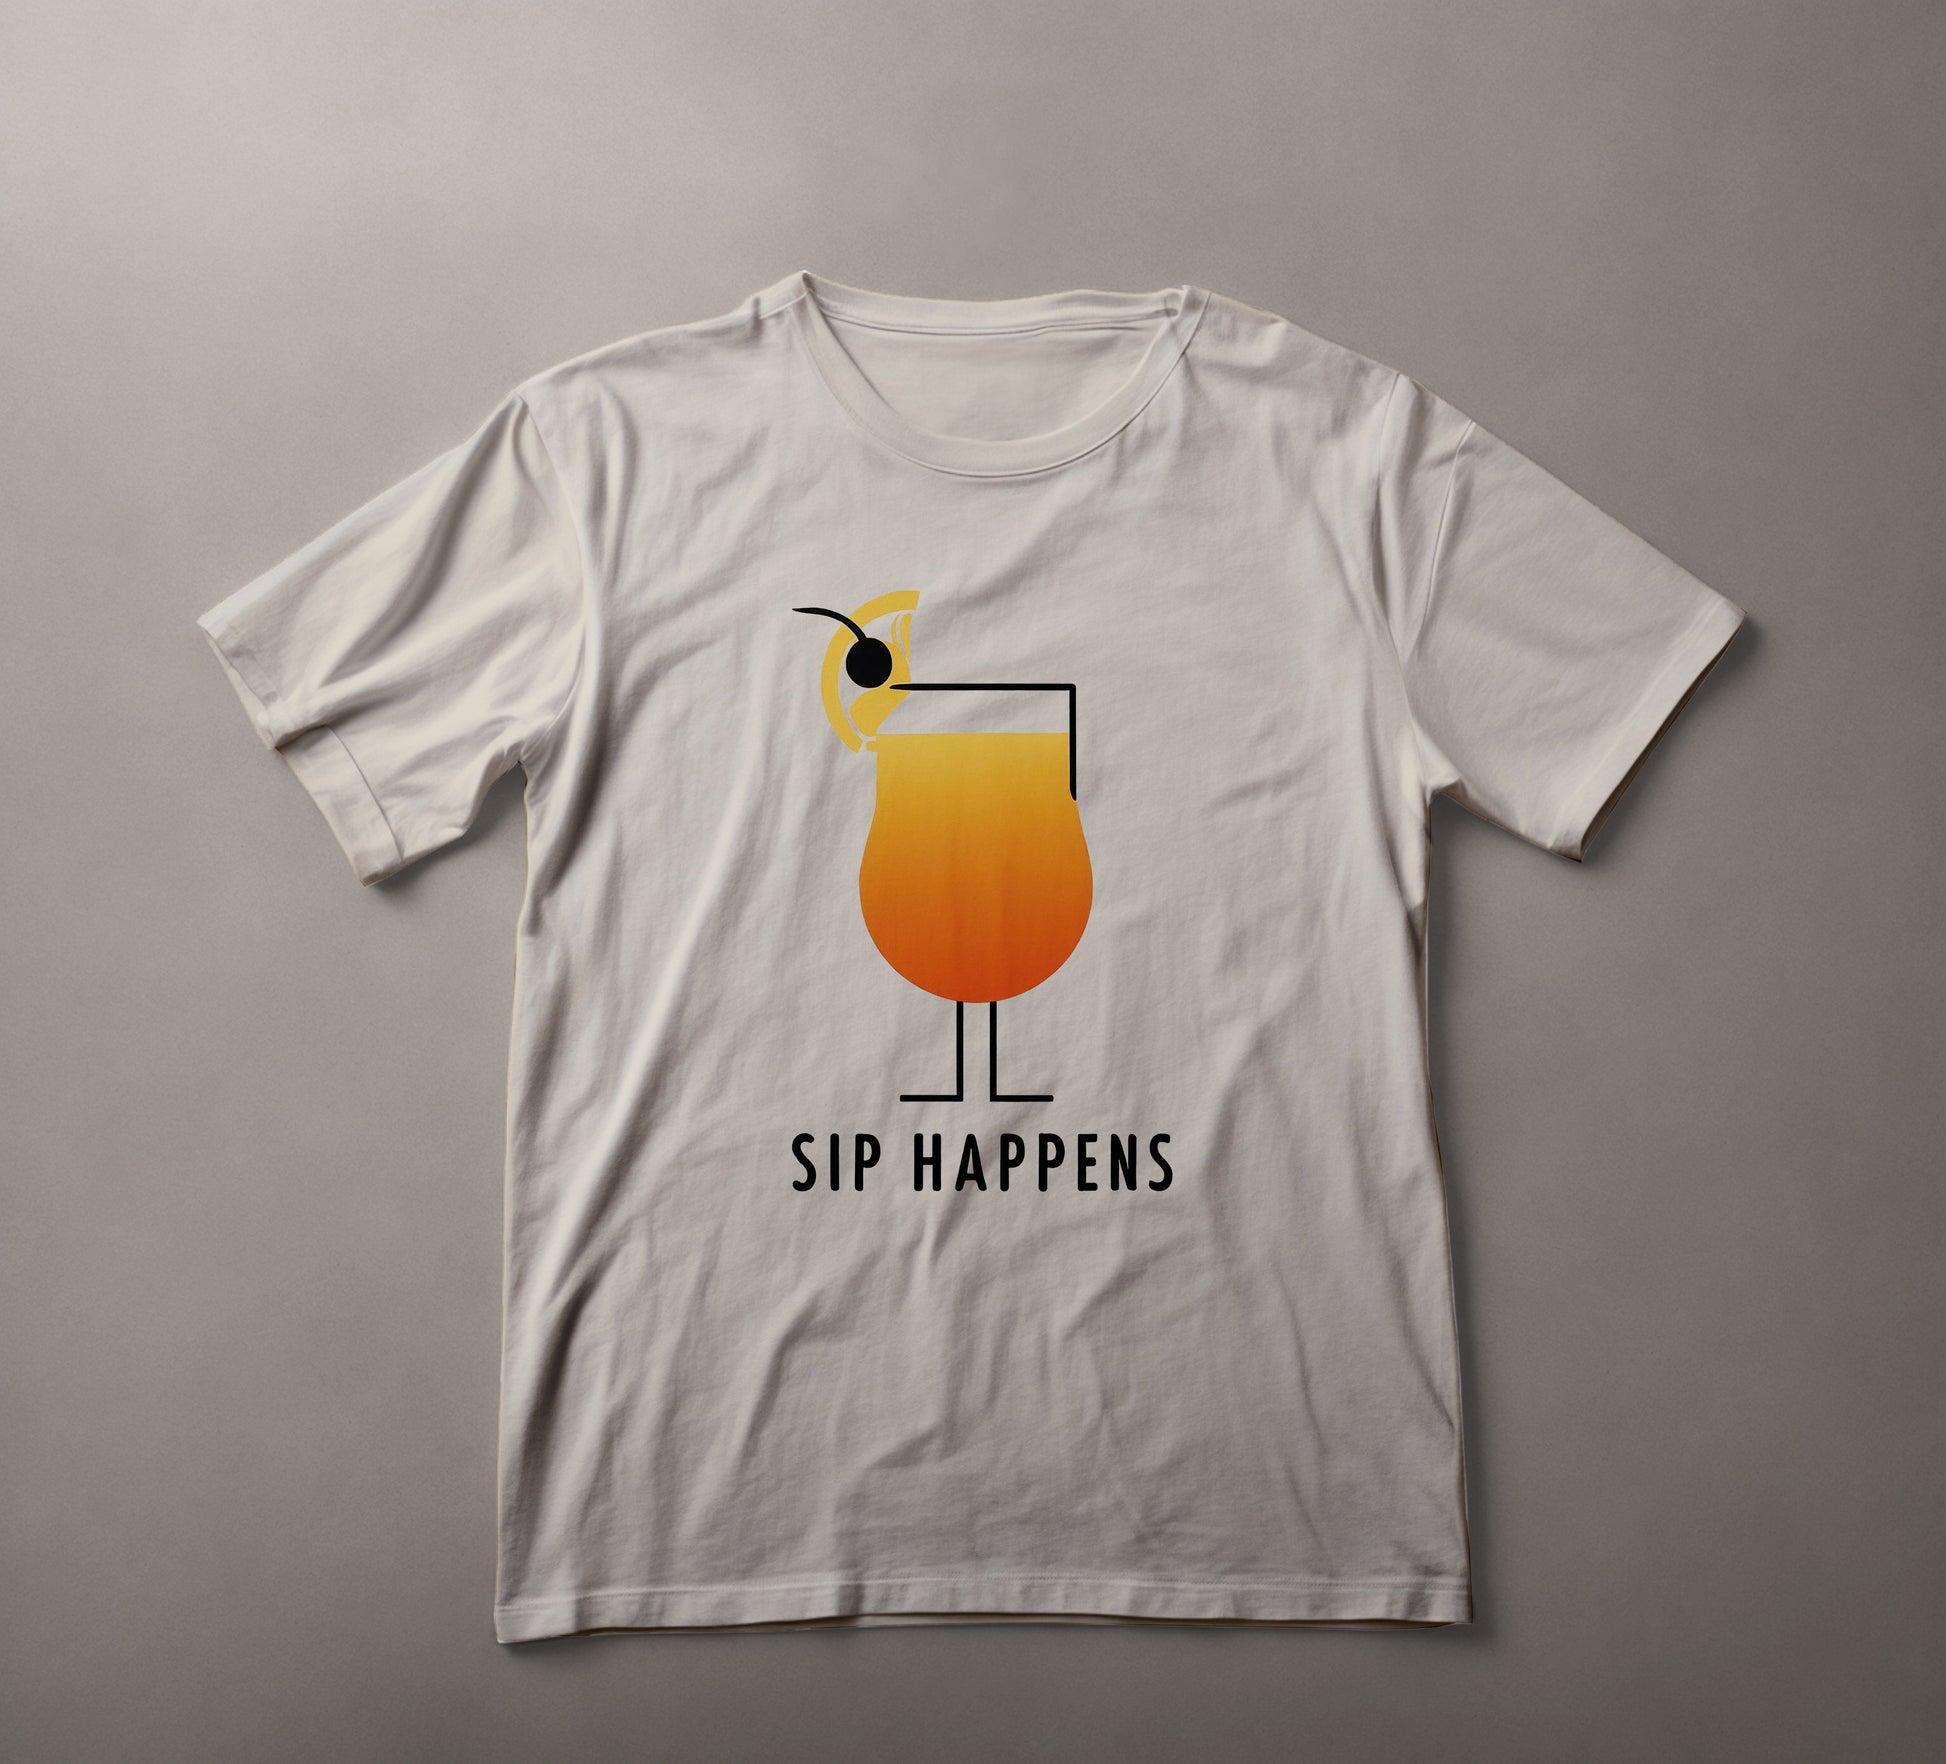 funny drinking t-shirt, cocktail graphic tee, sunny beverage shirt, casual summer wear, penguin design apparel, sip happens pun, happy hour t-shirt, beach vacation clothing, whimsical tee, humorous barwear